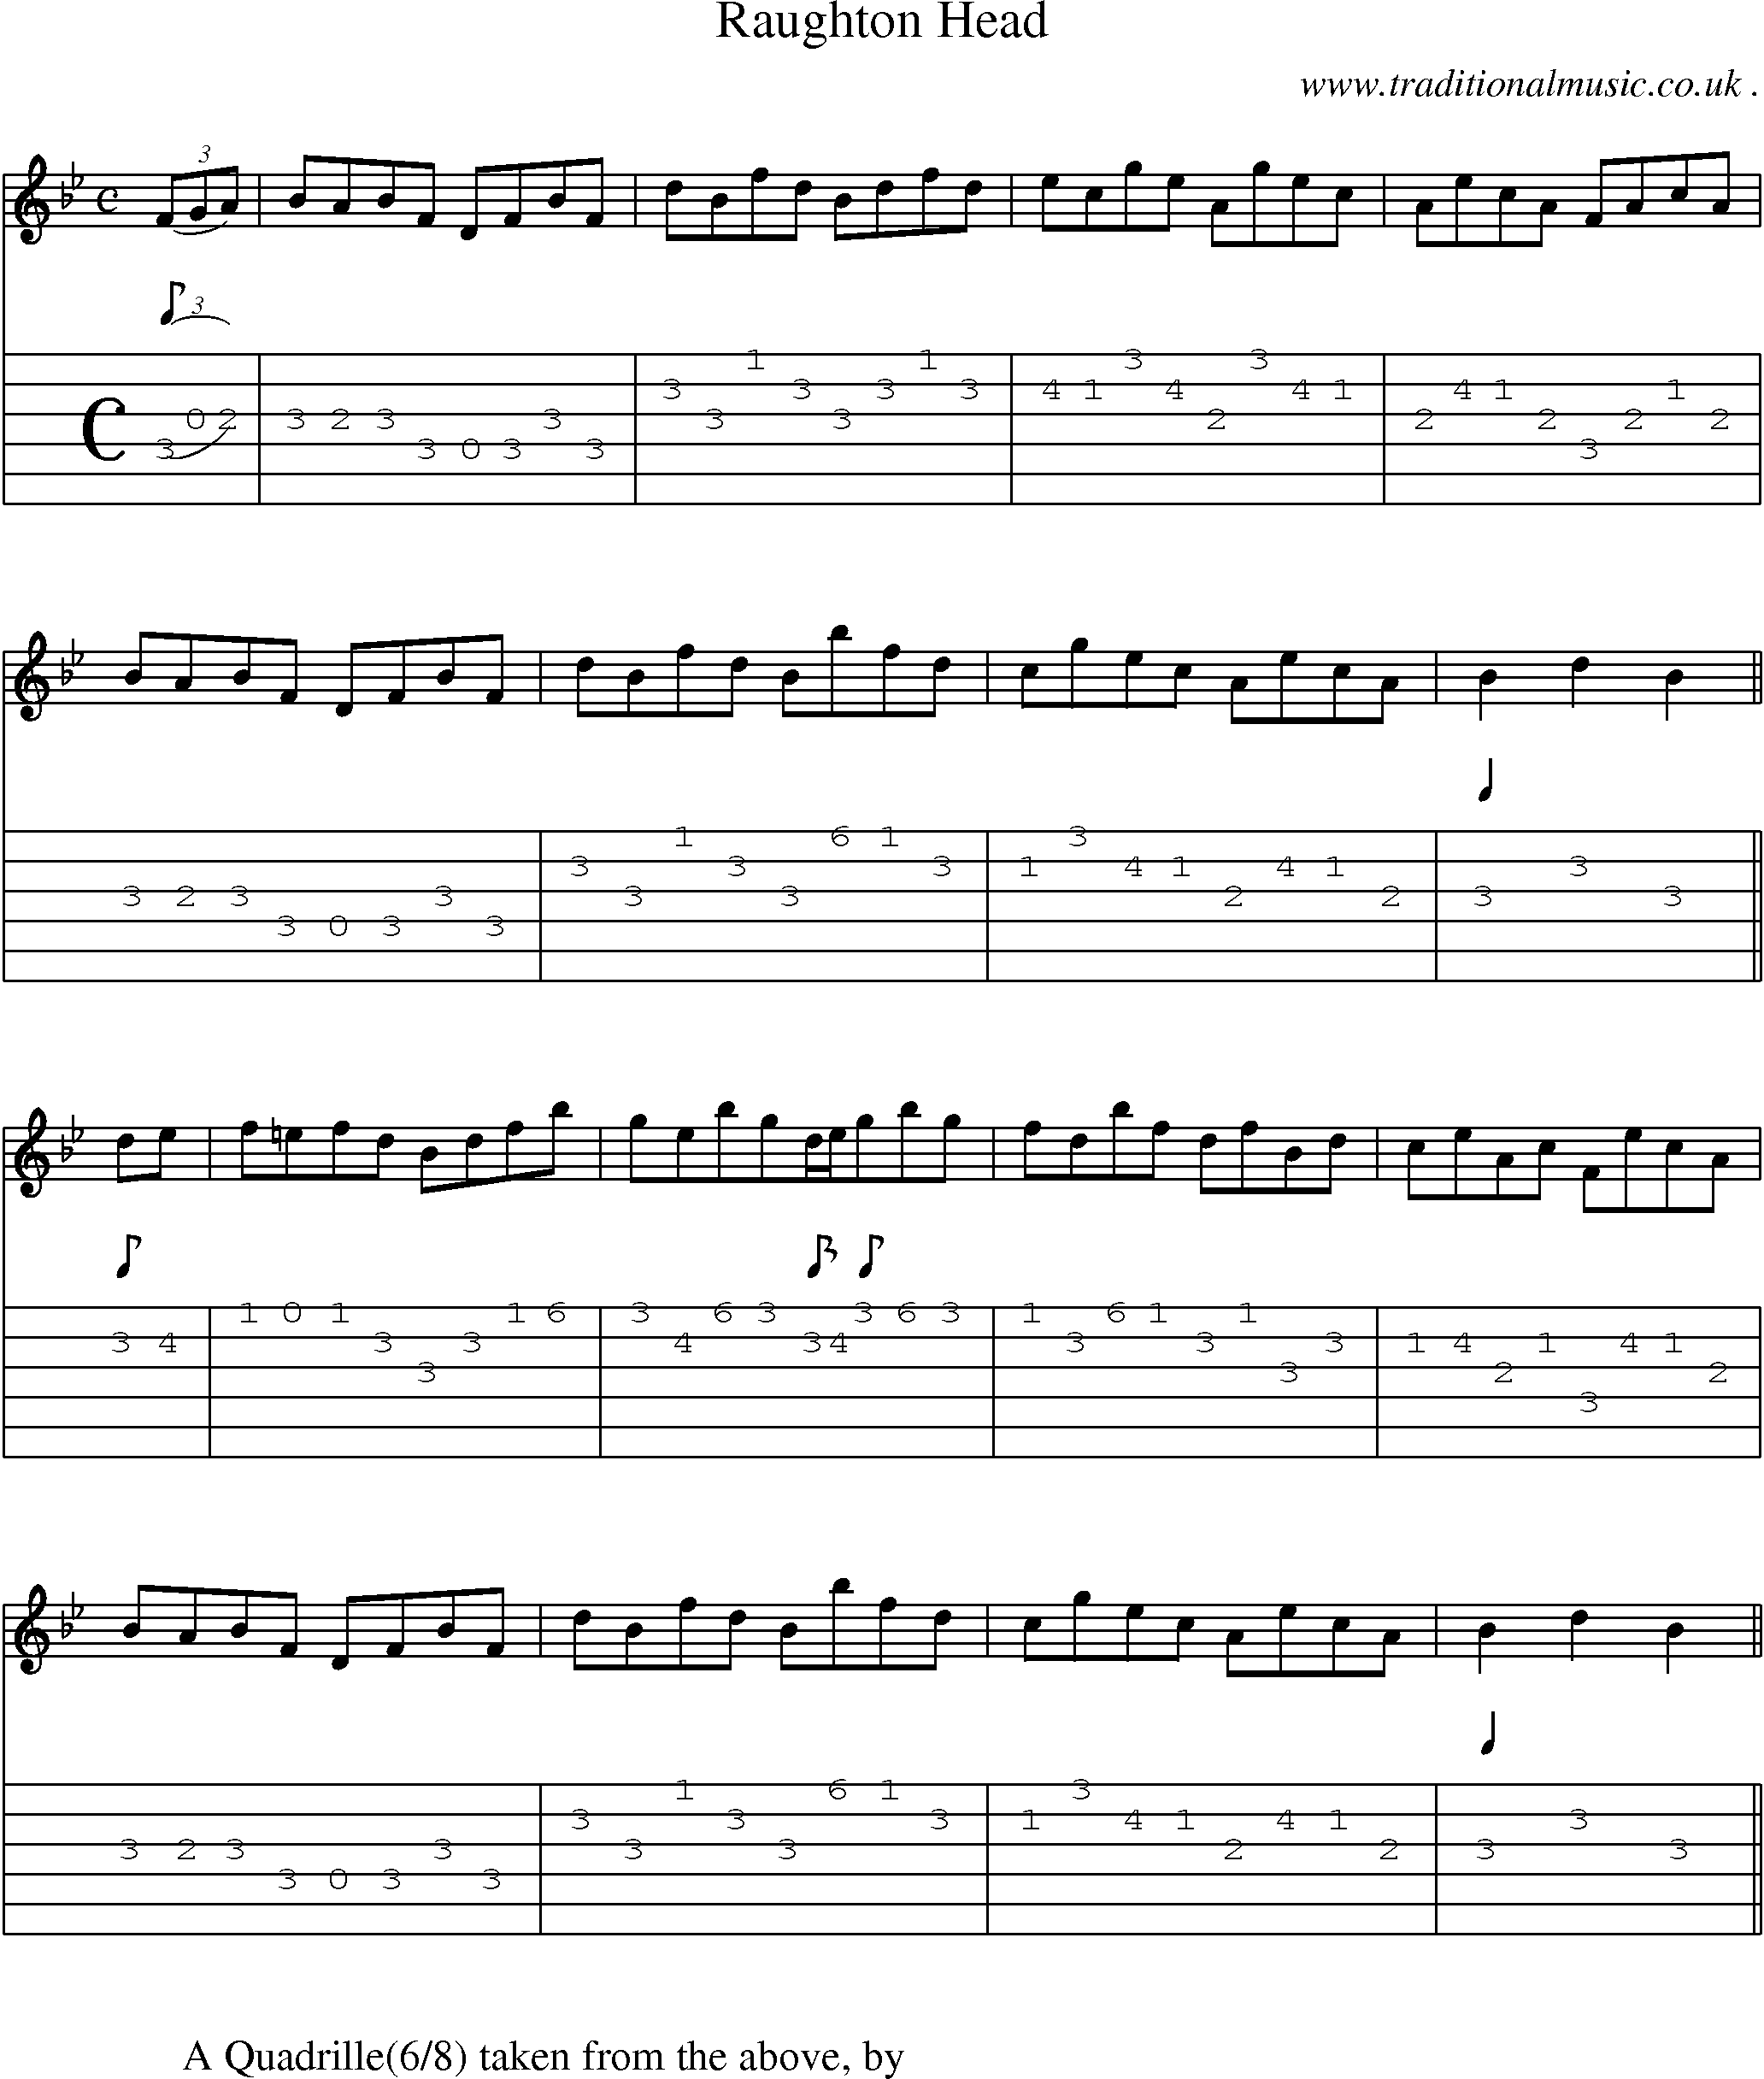 Sheet-Music and Guitar Tabs for Raughton Head